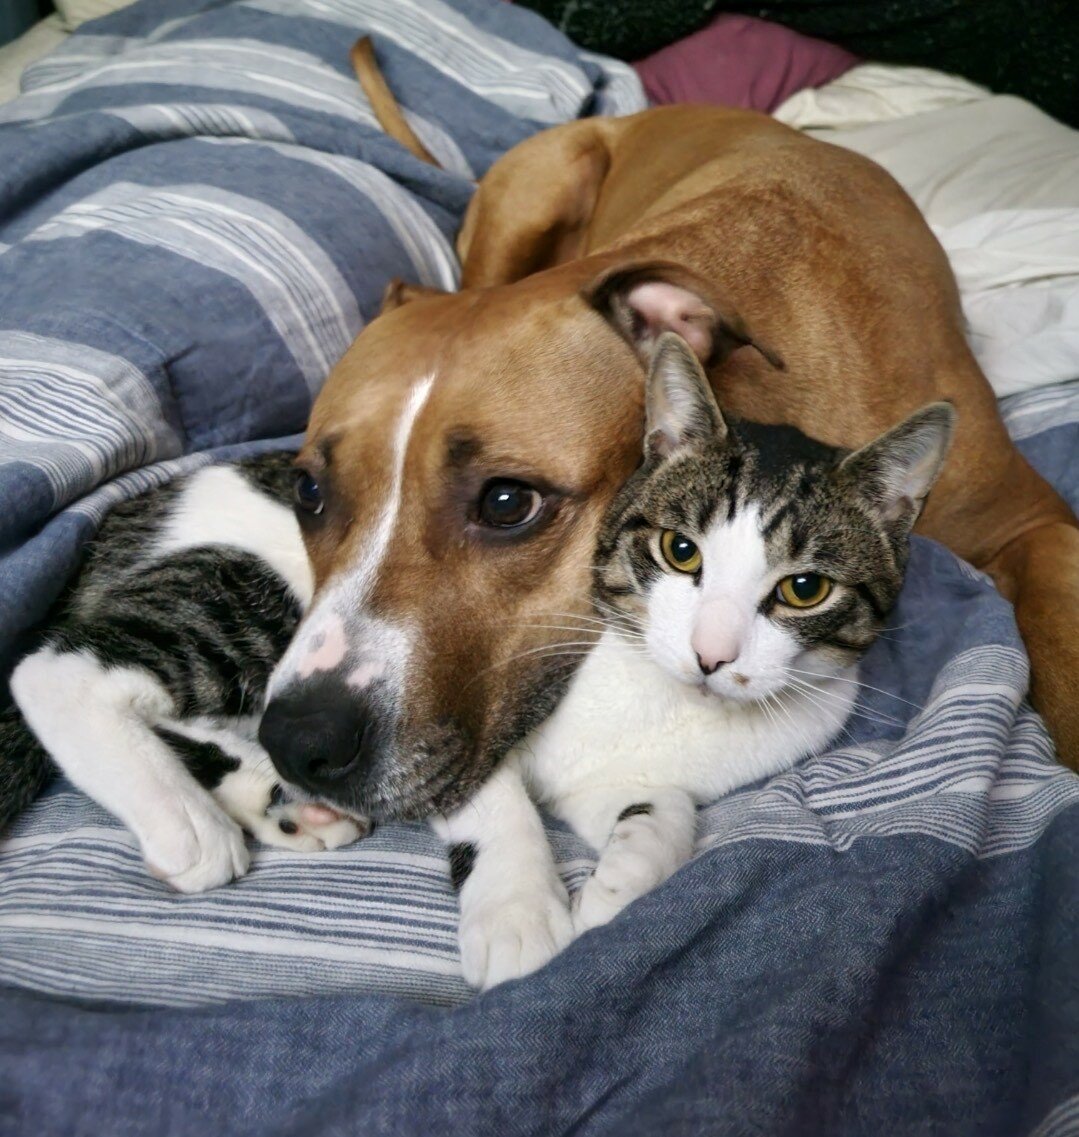 Indie the dog and Kon the cat won the 2023 Delaware Star Pets Photo Contest. Photo by Chris Young and Laura Matusheski of Newark, Del.